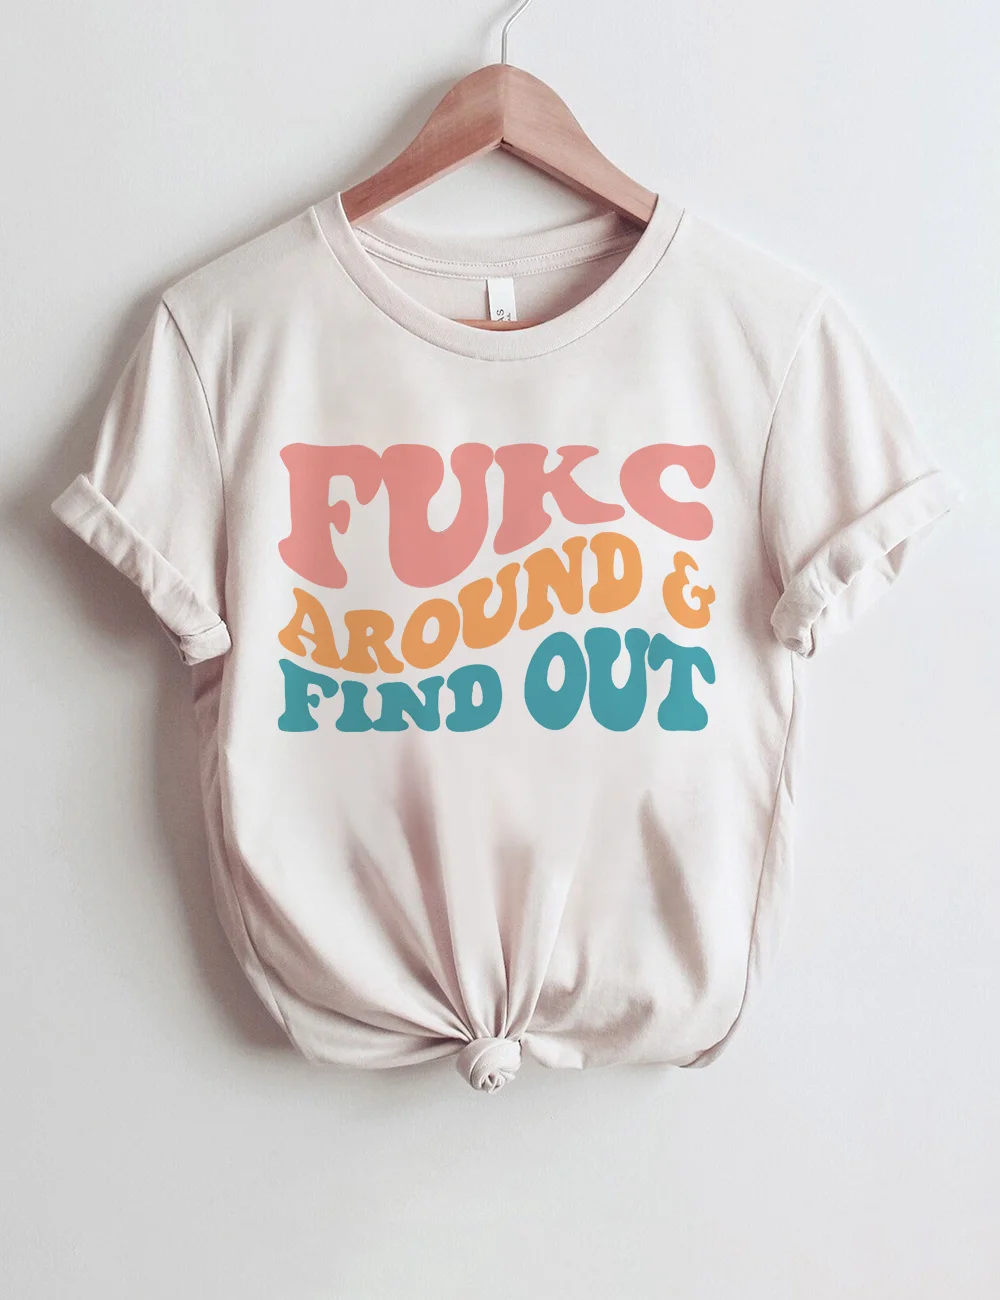 Fukc Around and Find Out T-Shirt